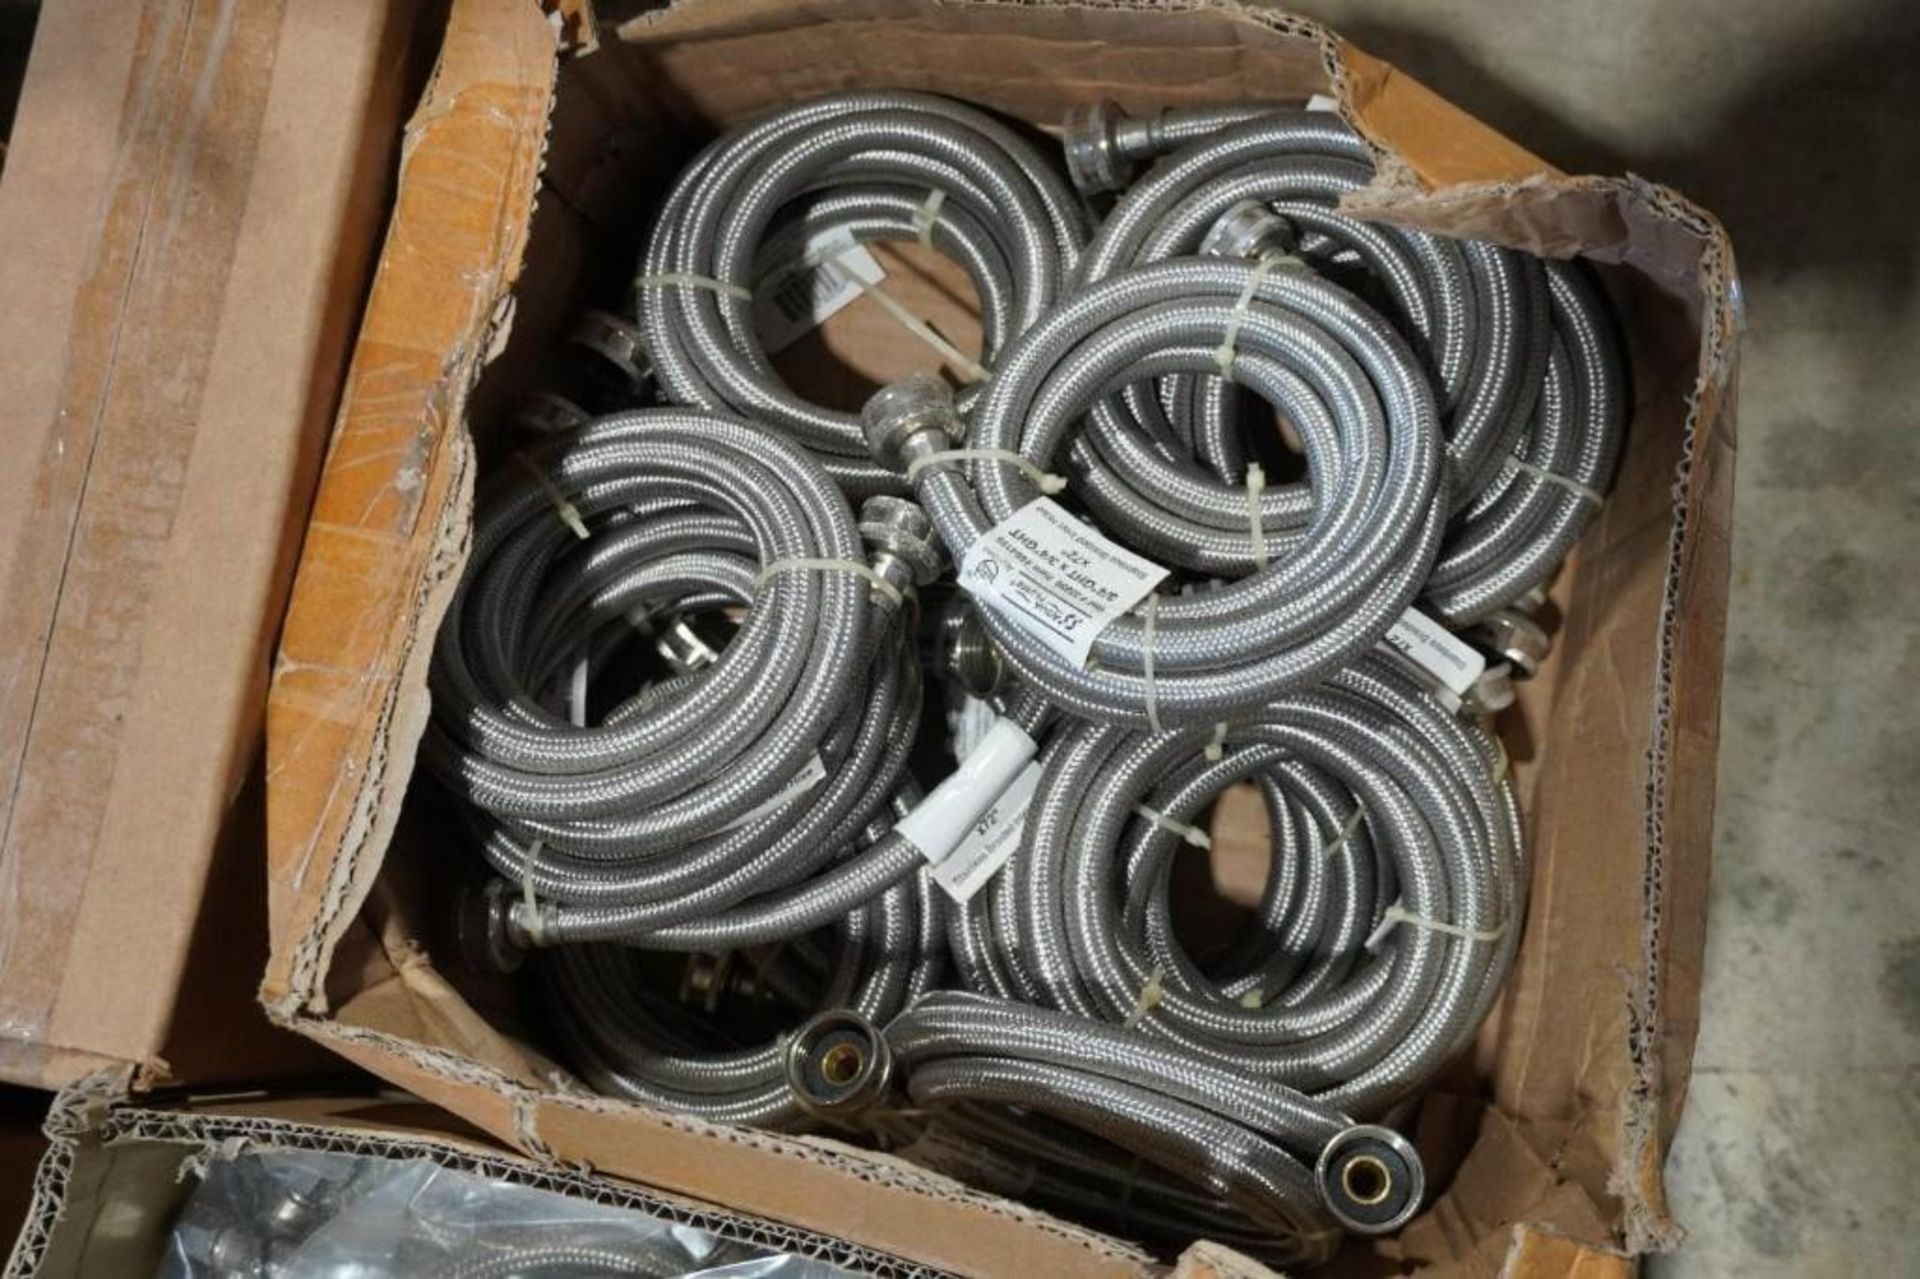 Skid of Hoses - Image 8 of 11